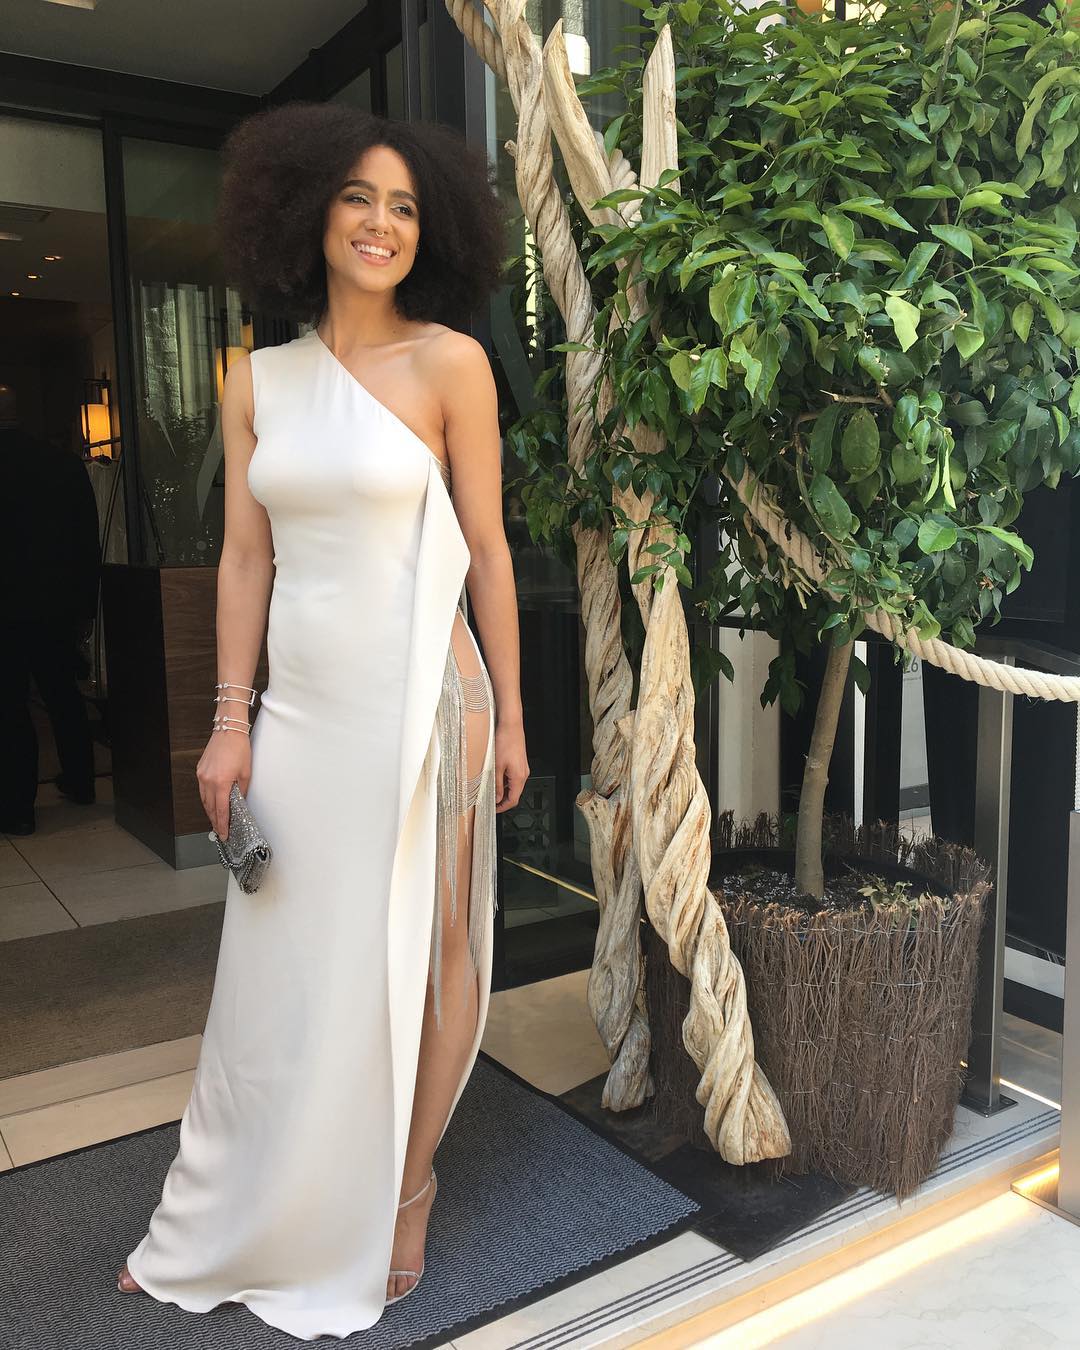 49 Hottest Nathalie Emmanuel Bikini Pictures Are Like Heaven On Earth | Best Of Comic Books